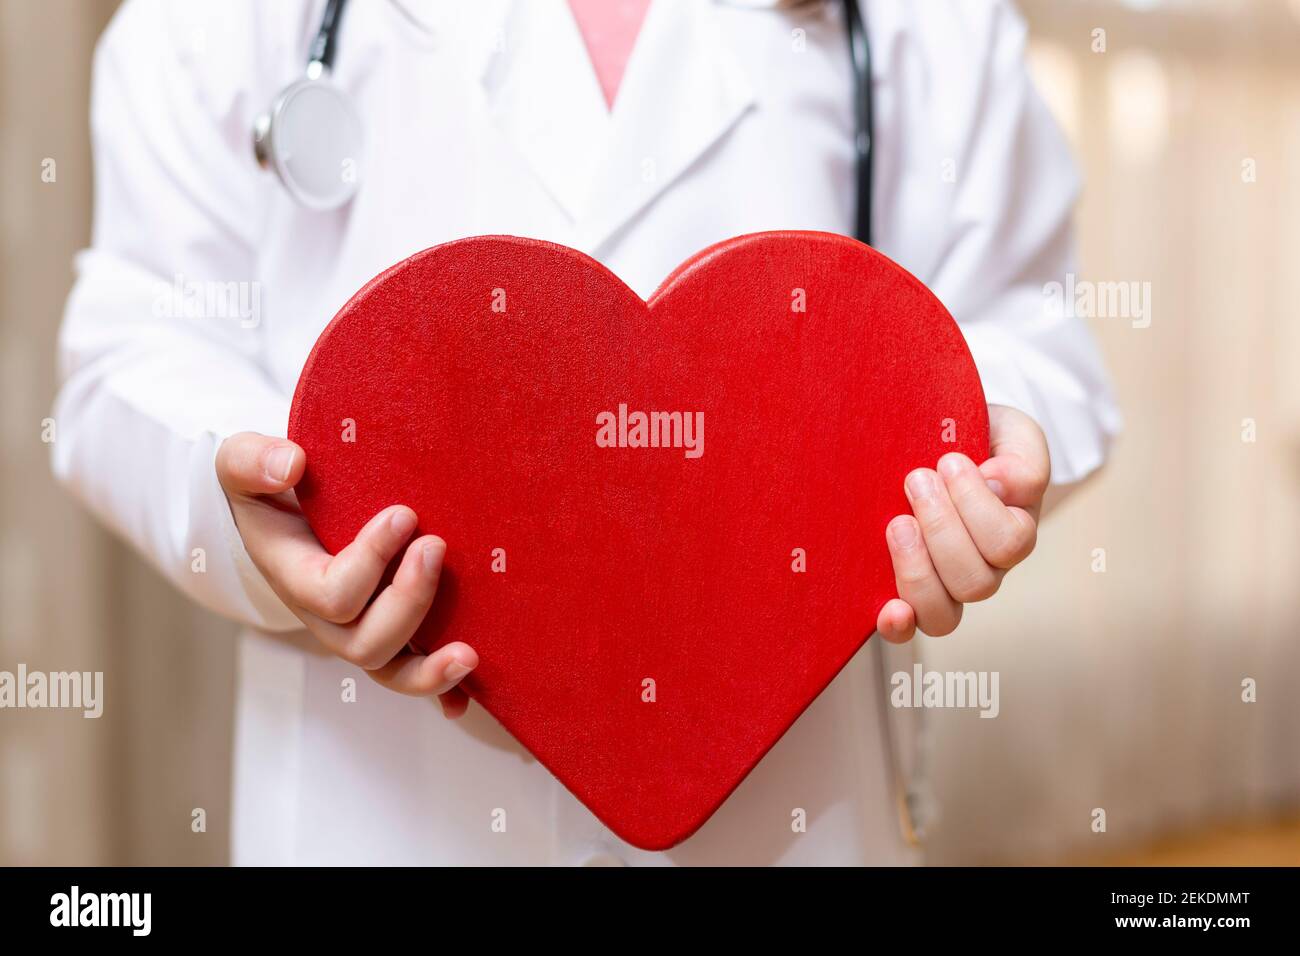 Close up of unrecognizable person in doctor's dress holding a big heart in his hands. Concept of health and wellness. Stock Photo